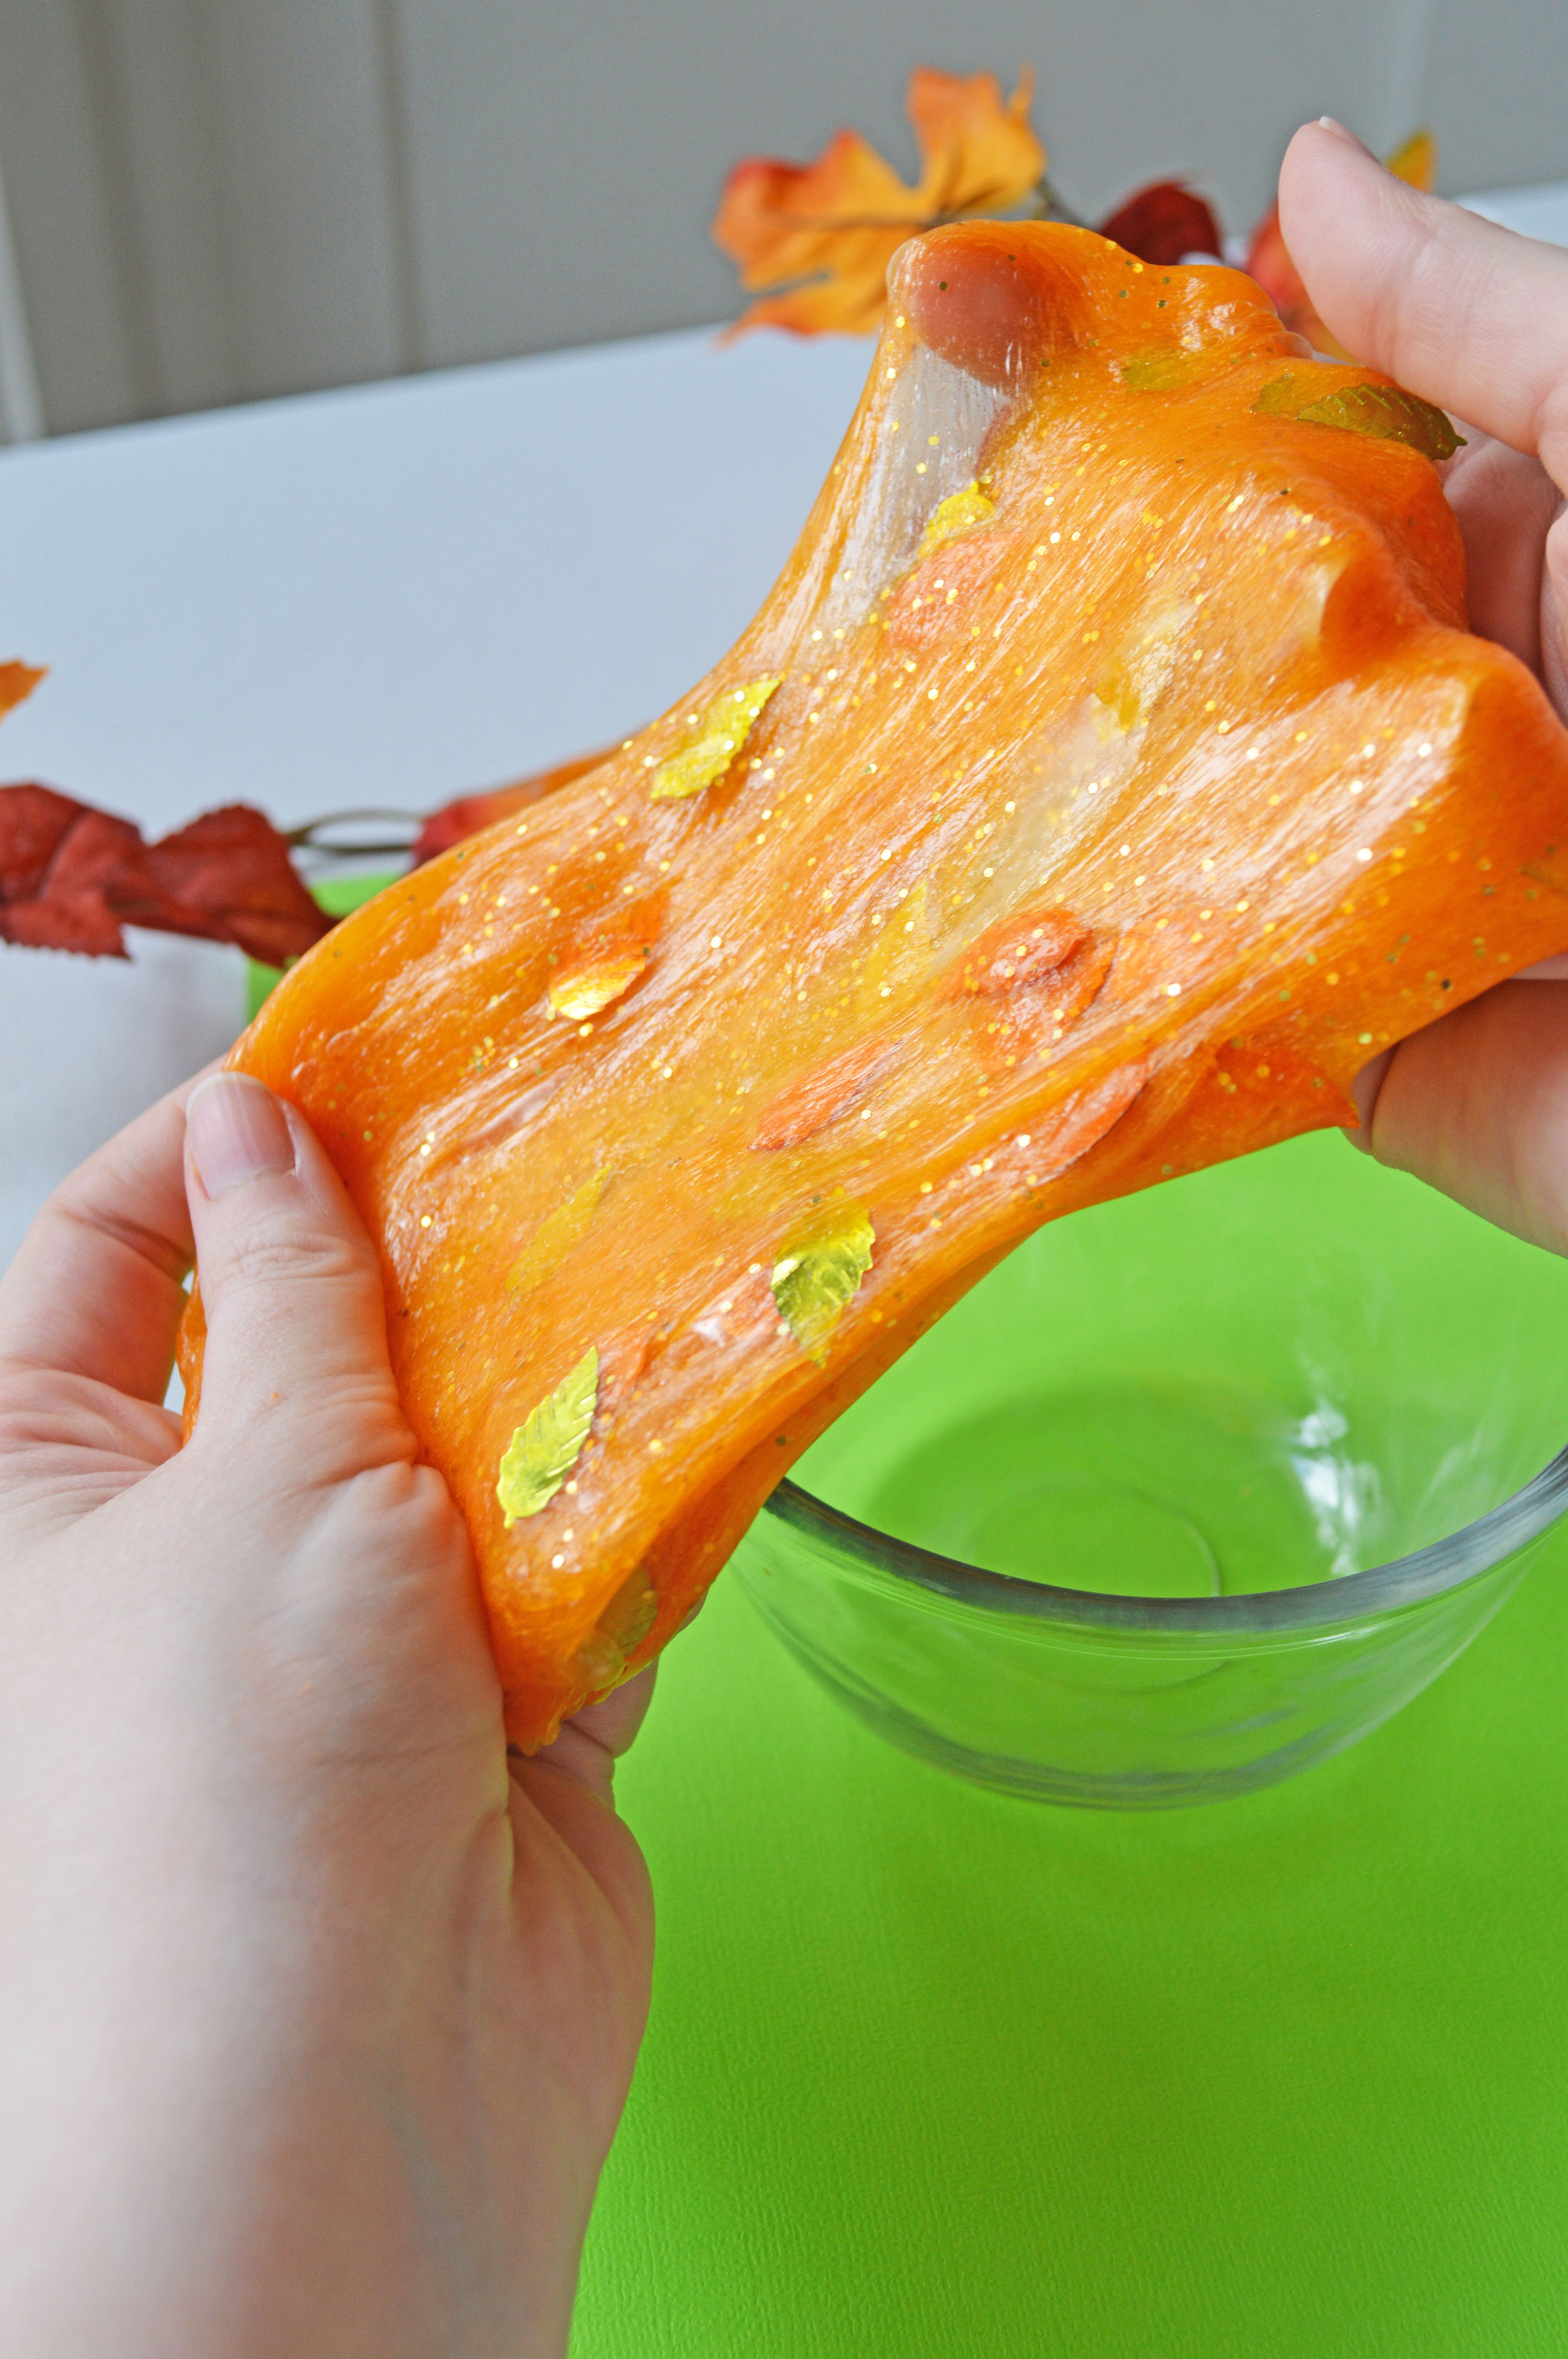 DIY bright orange slime with glitter and leaves